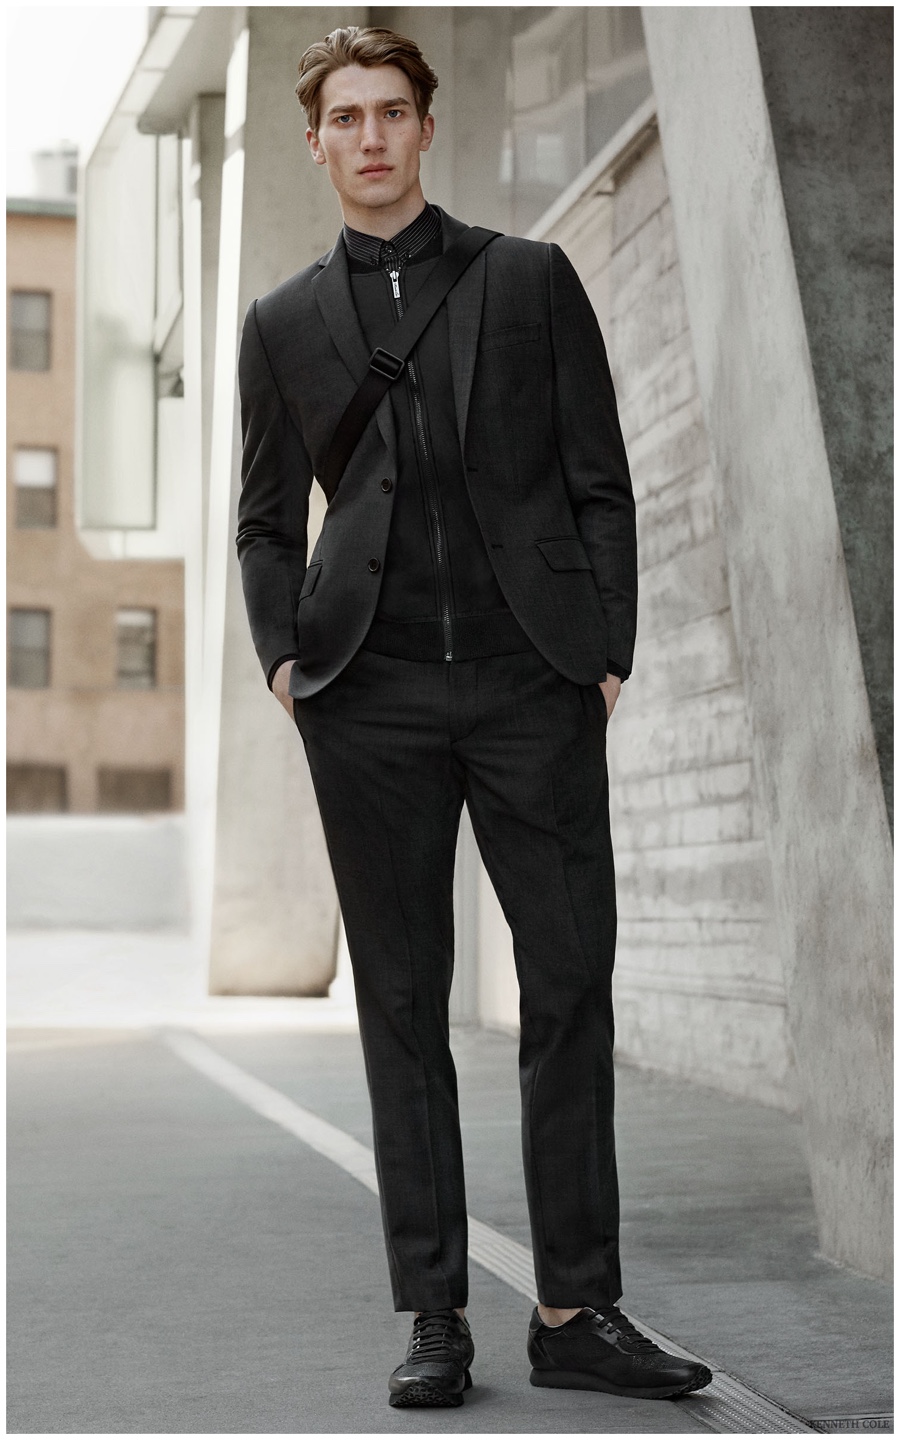 Kenneth Cole Fall/Winter 2015 Menswear Collection | The Fashionisto